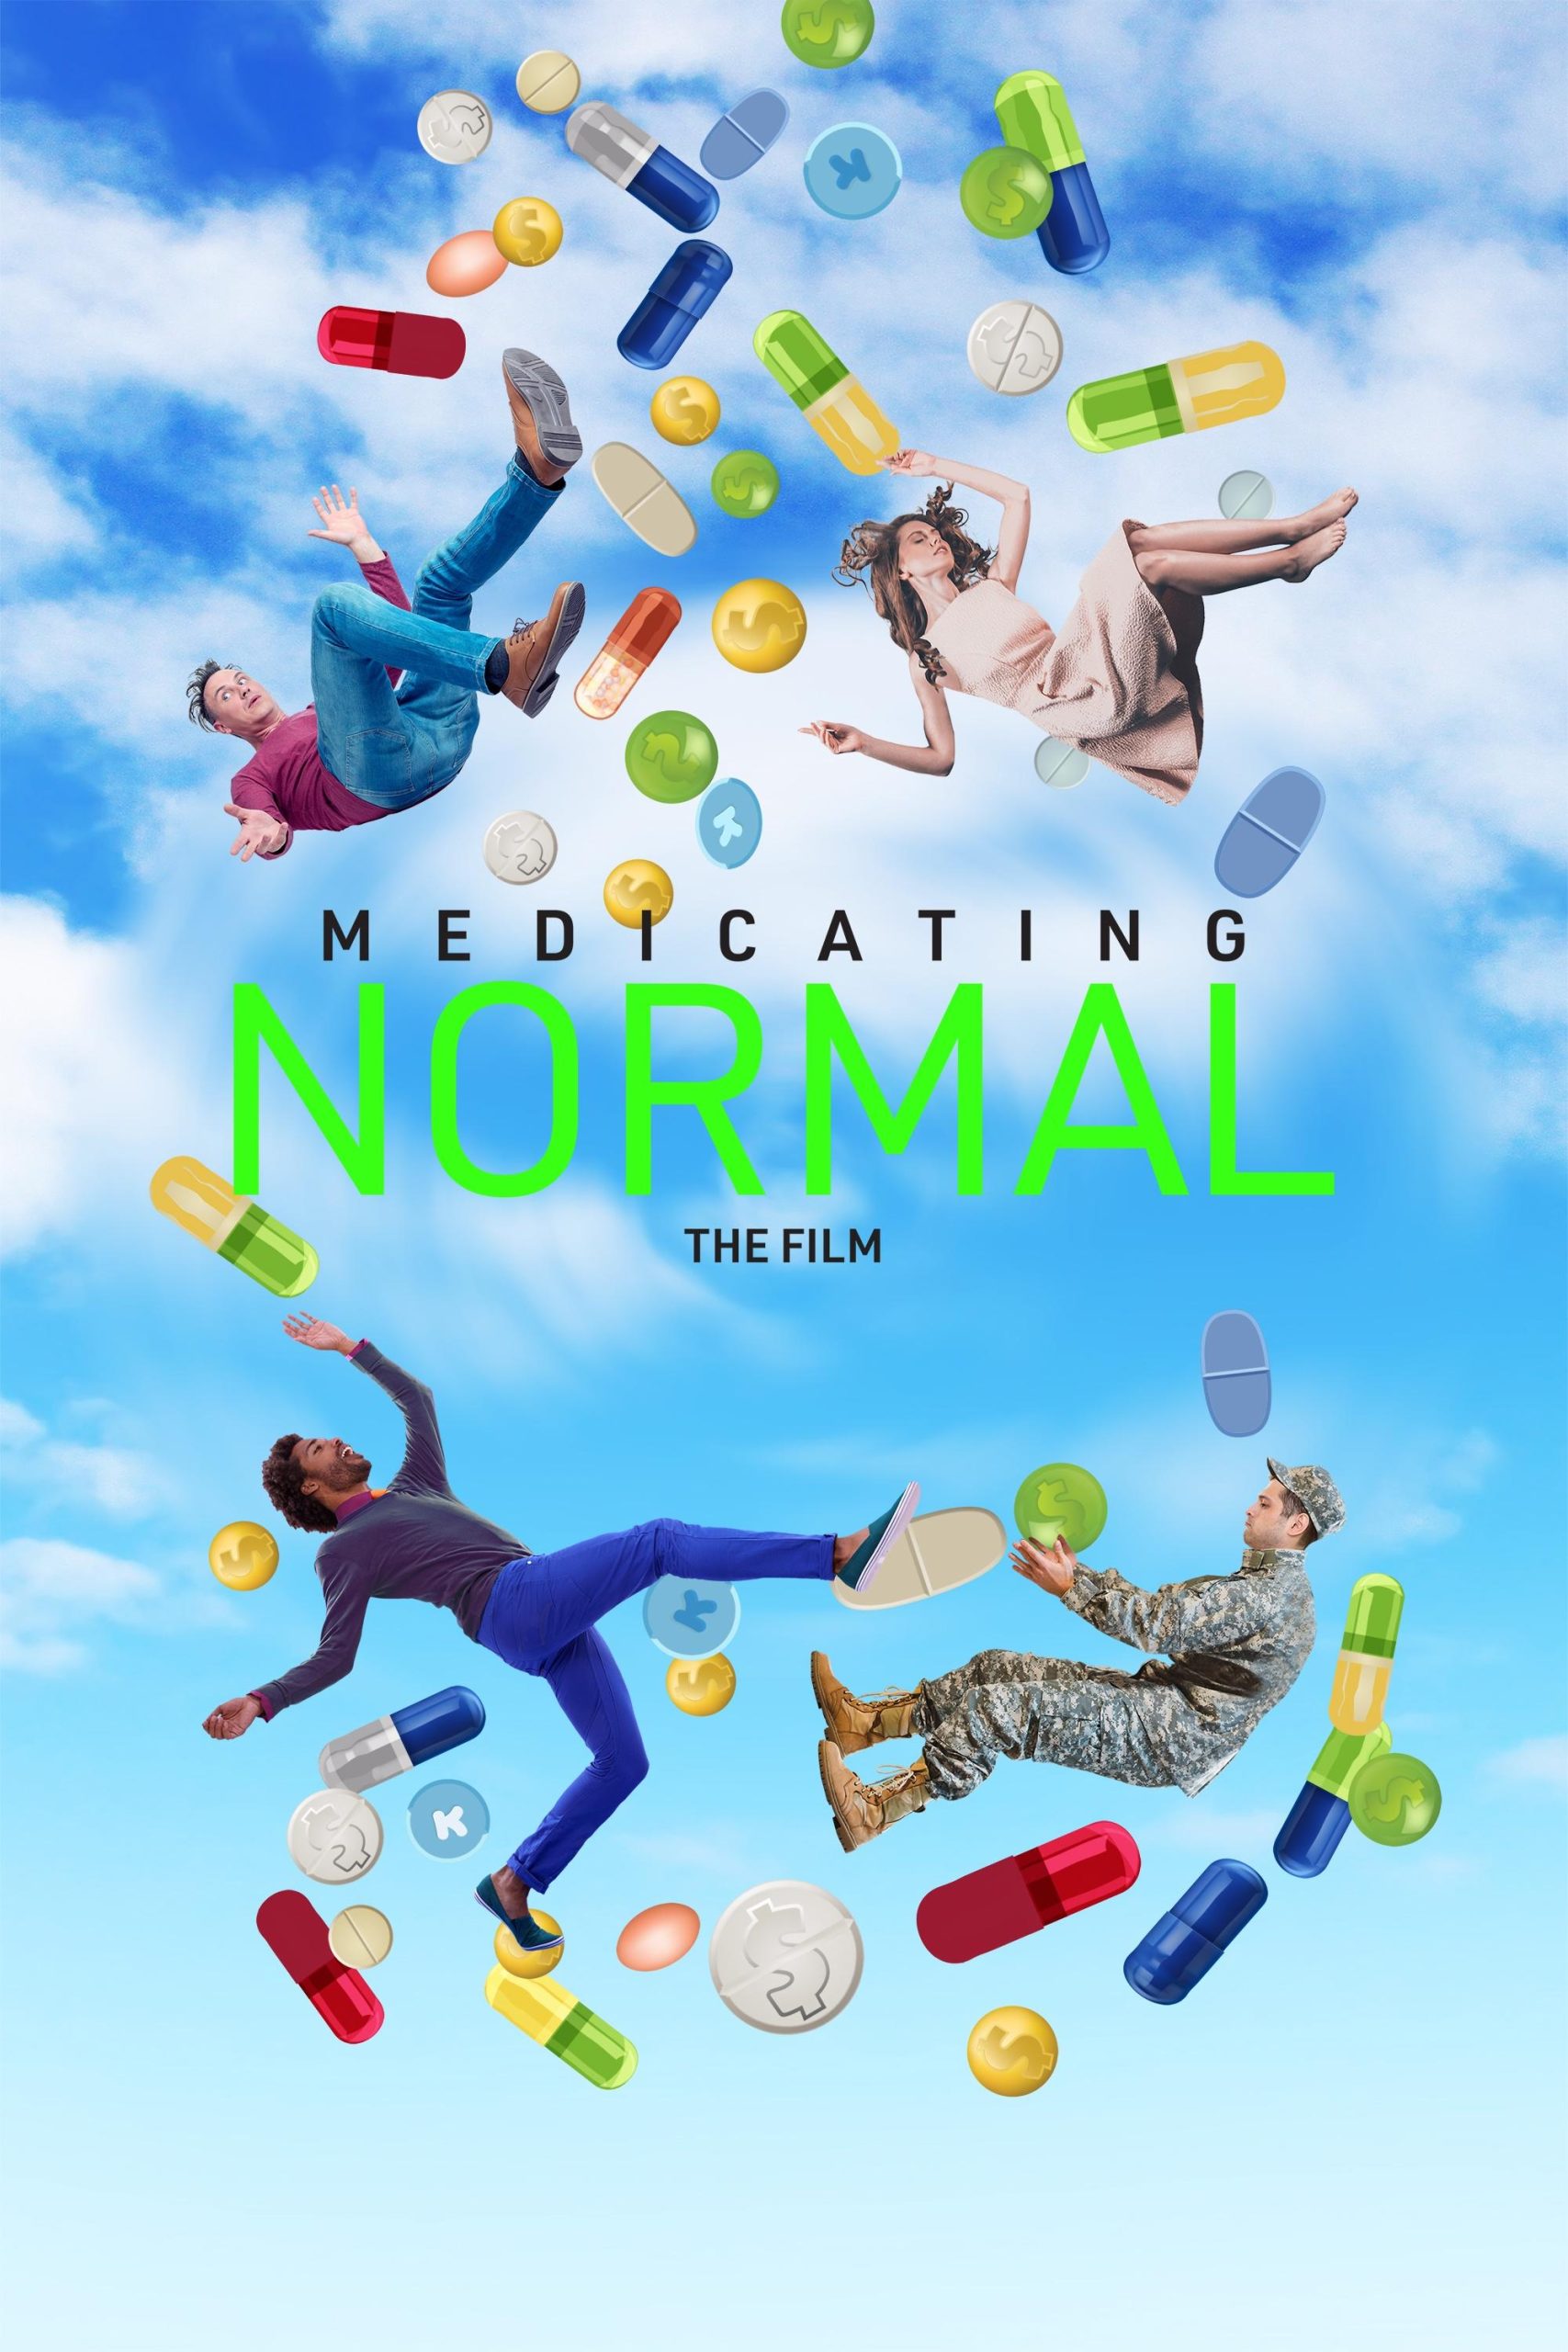 ‘Medicating Normal’ Sounds Another Warning on Psychiatric Drugs